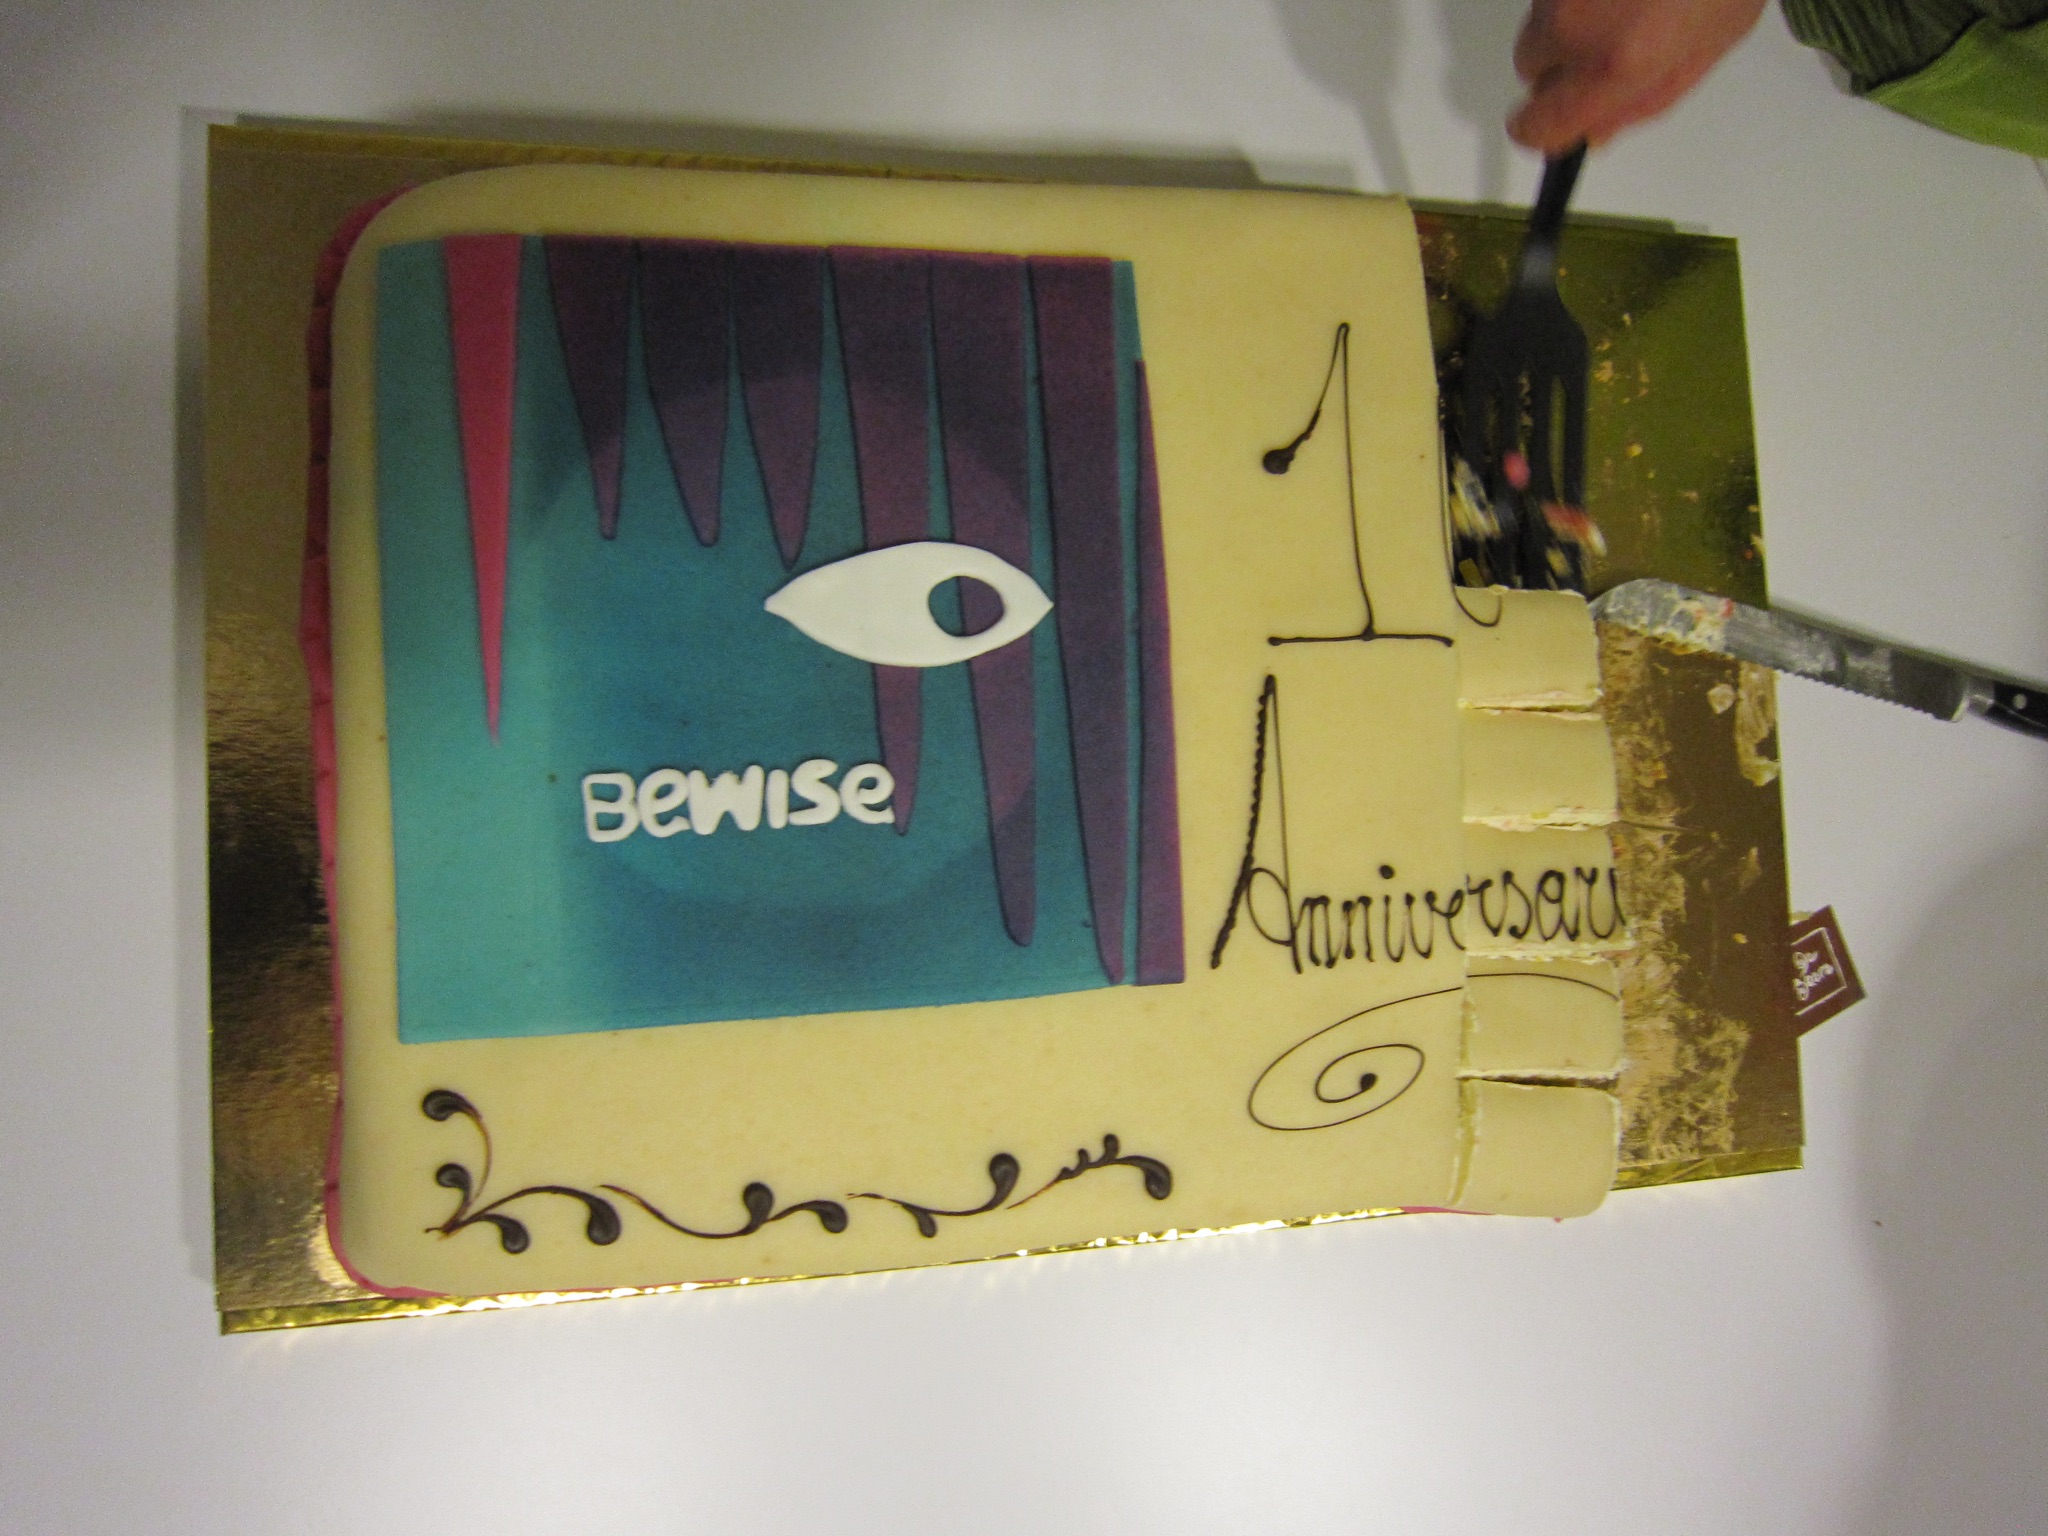 Celebrating 10 years of BeWiSe in 2012: conference and anniversary cake